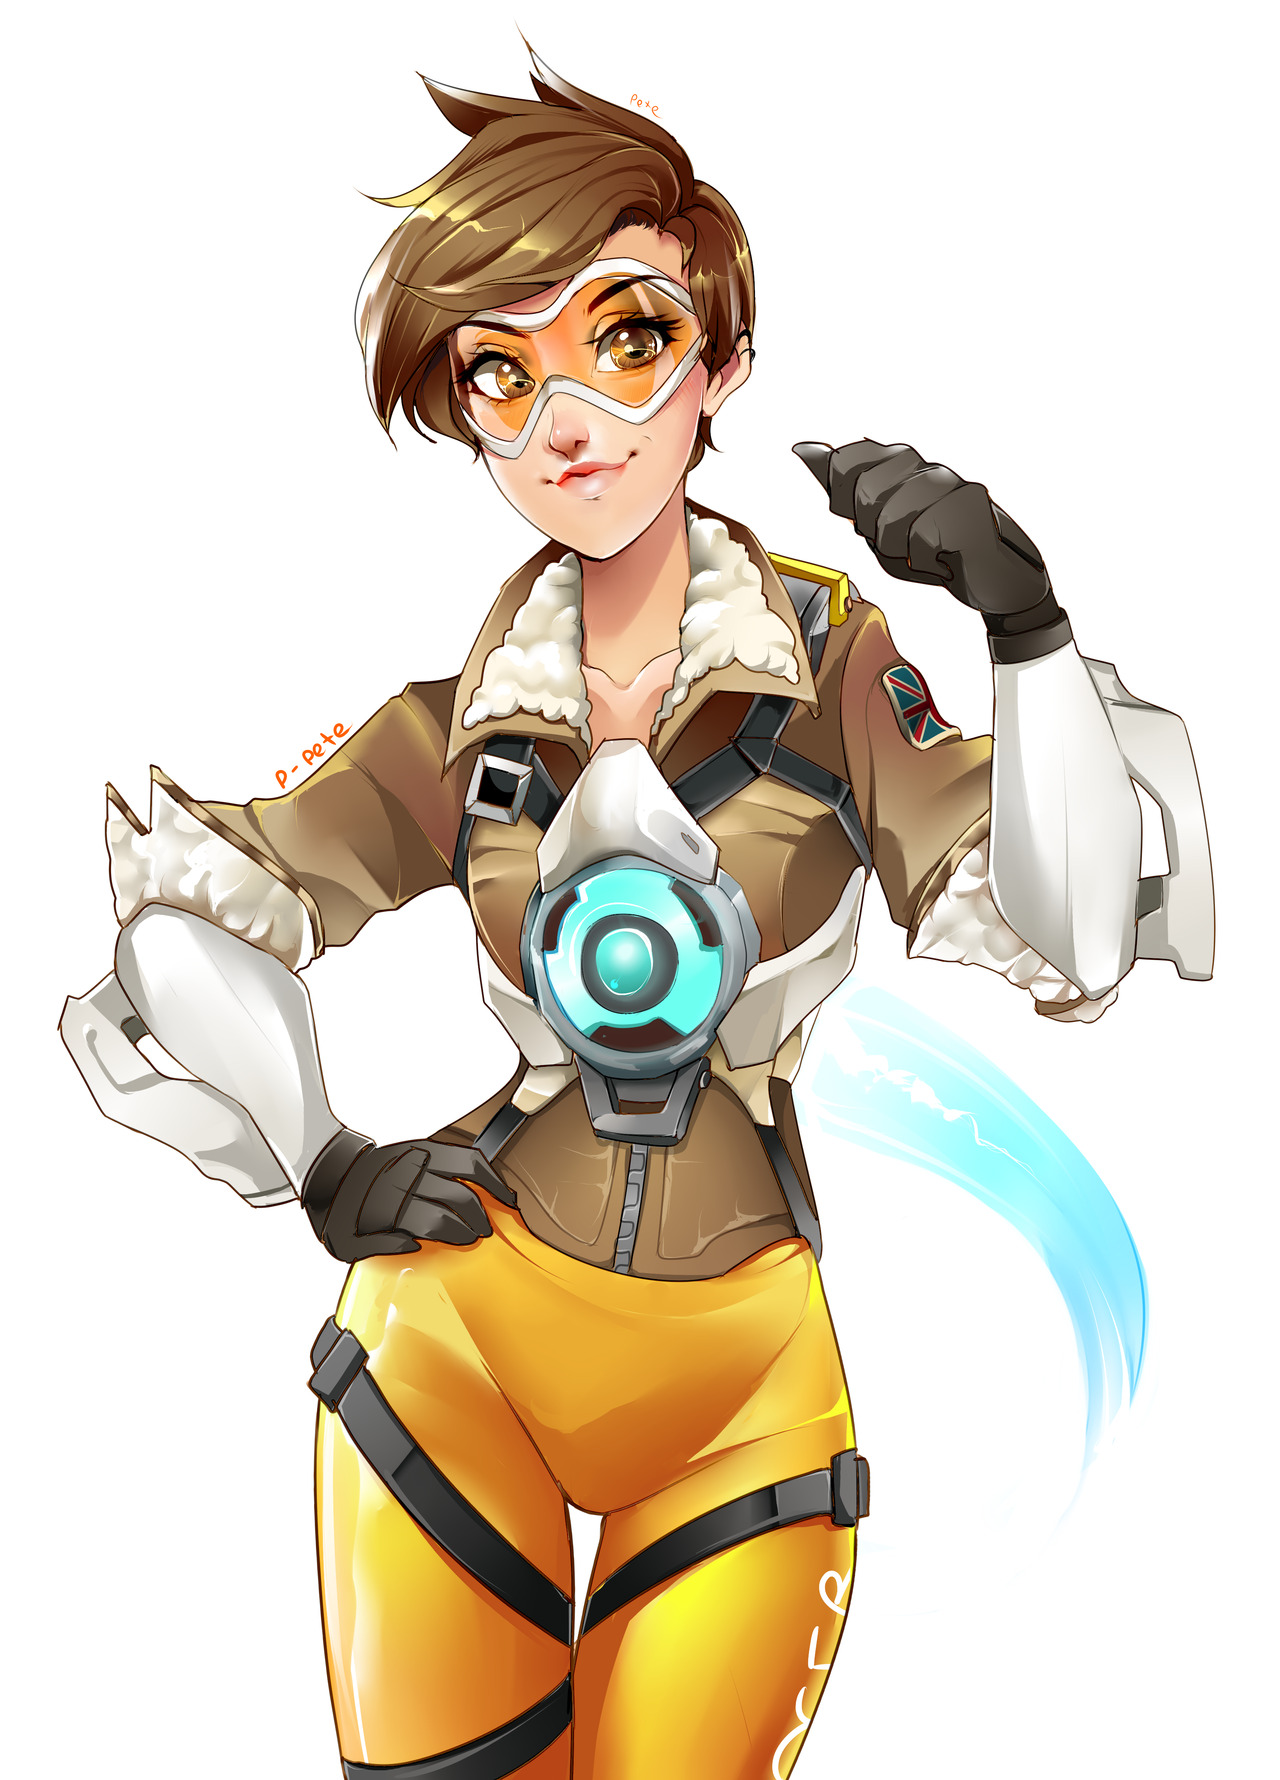 Potassium Pete S Tf2 Adventure Tracer From Overwatch Getting